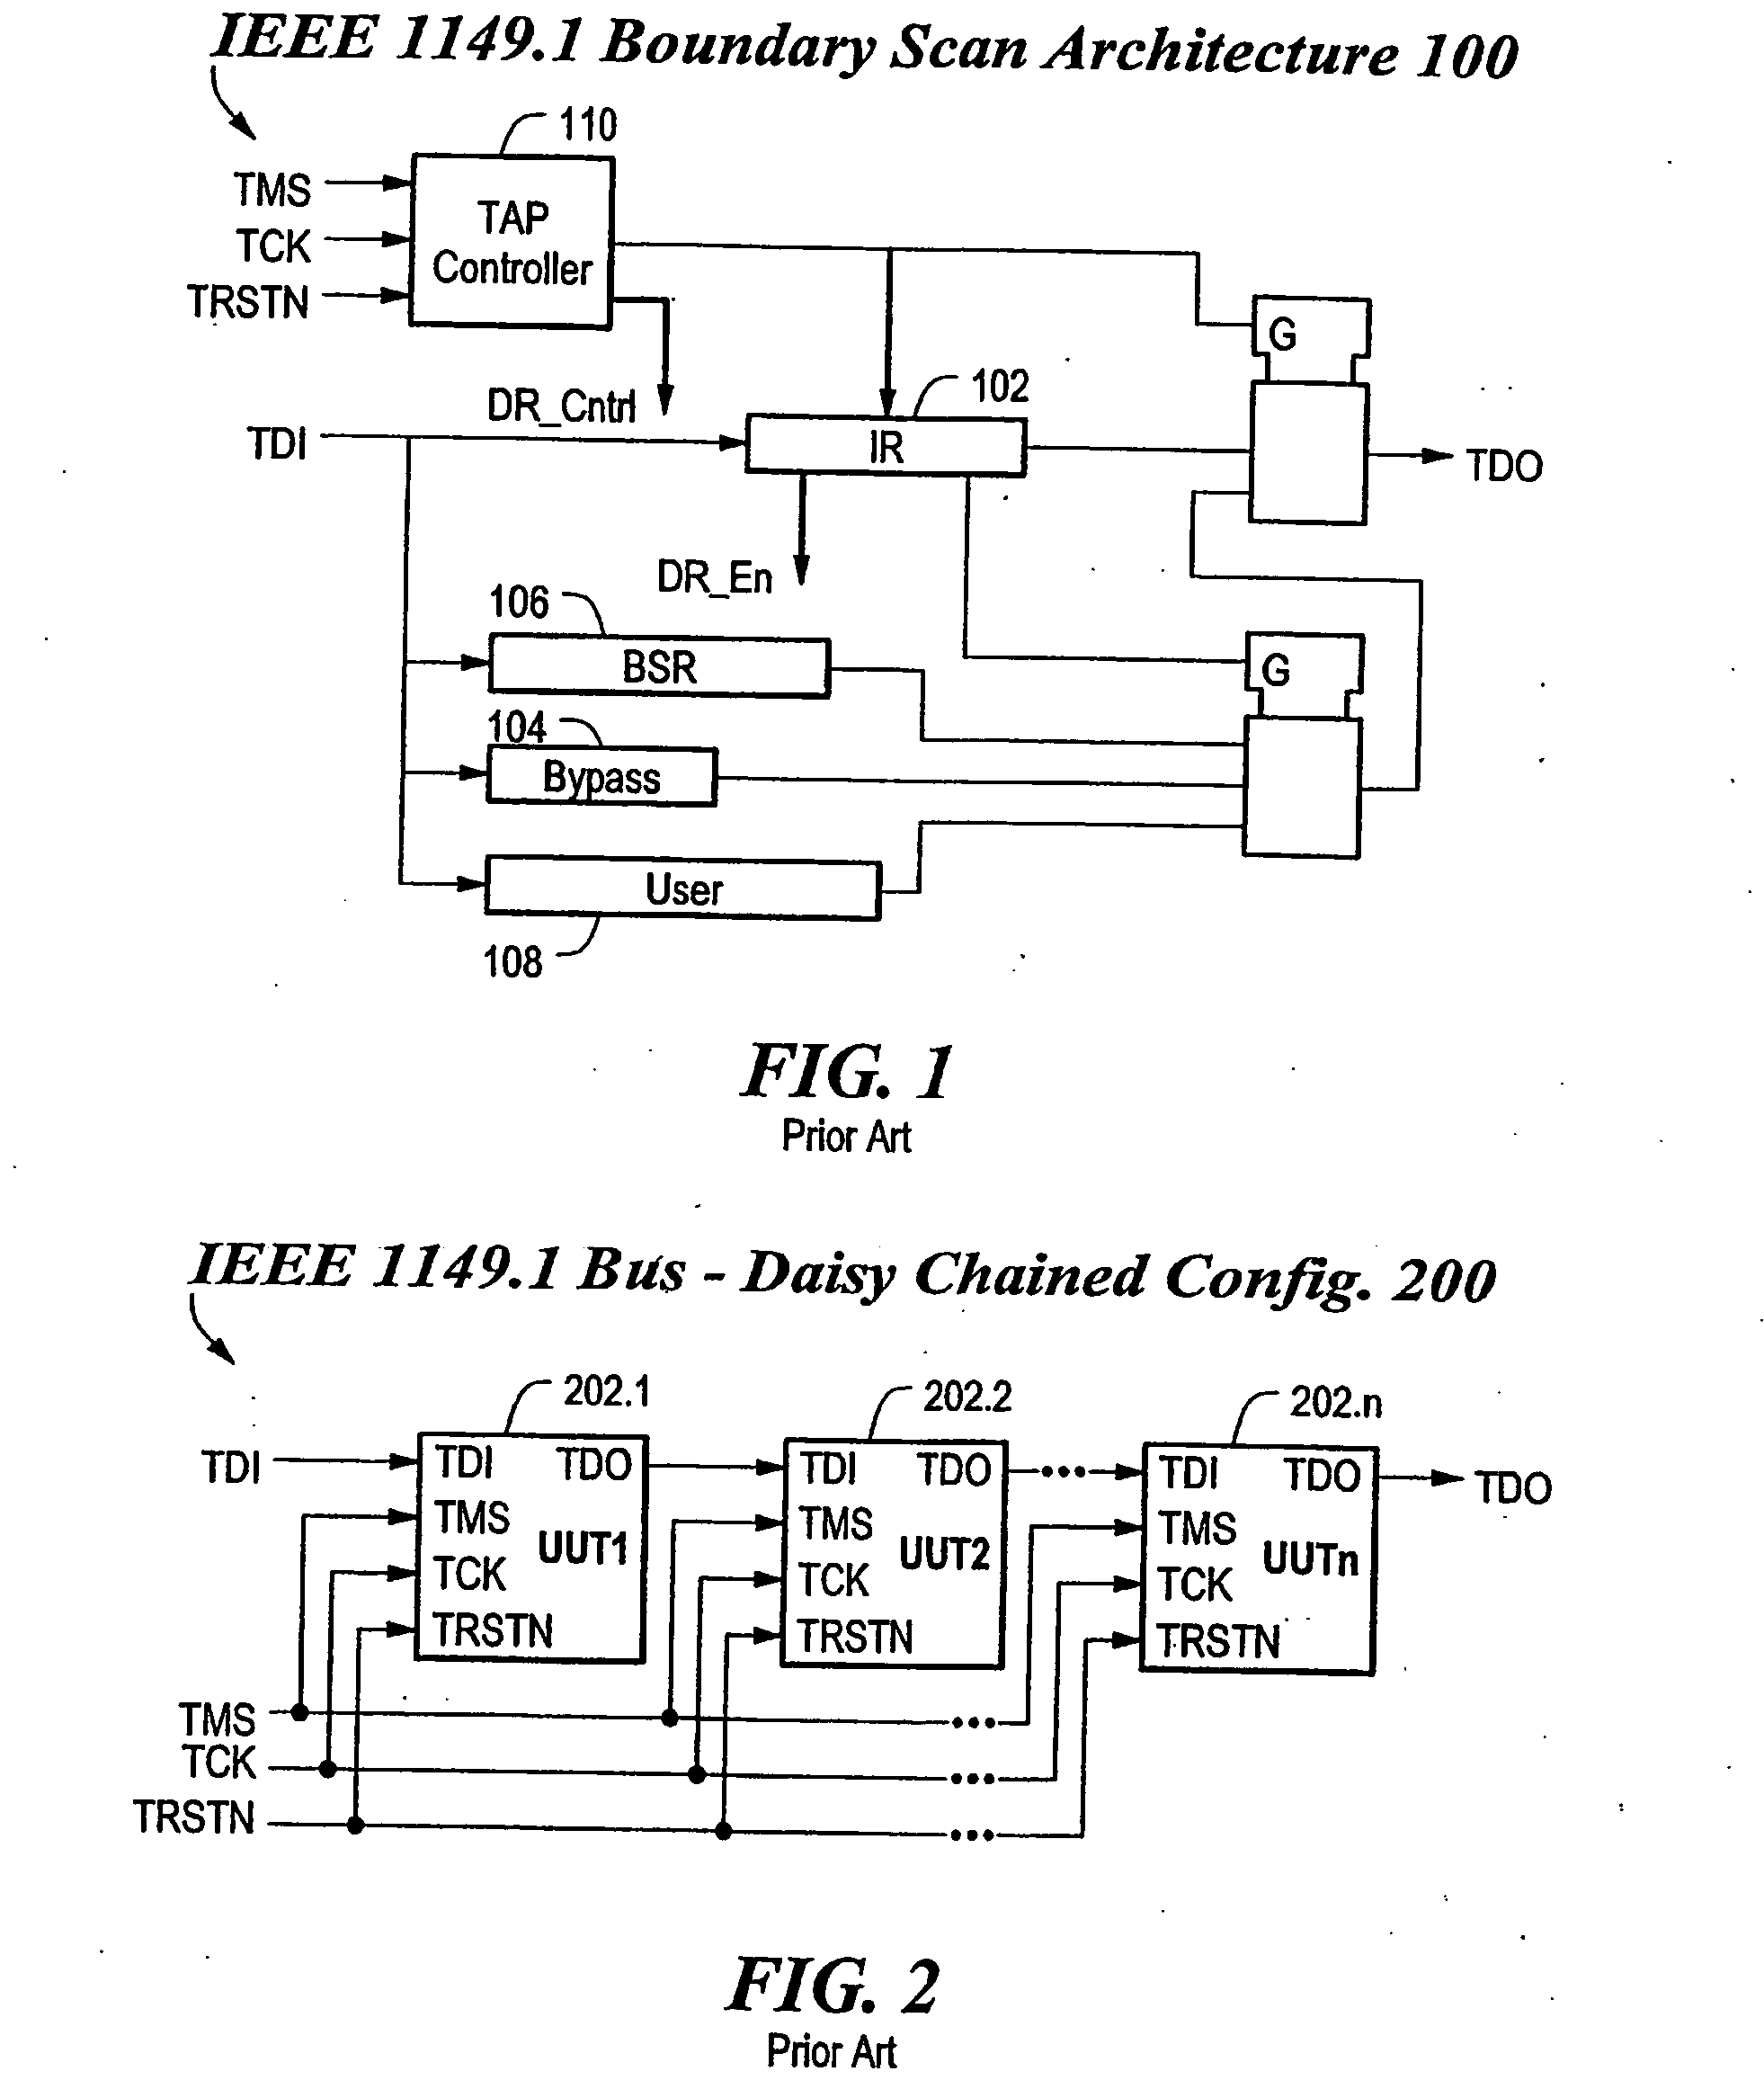 Method and apparatus for optimized parallel testing and access of electronic circuits